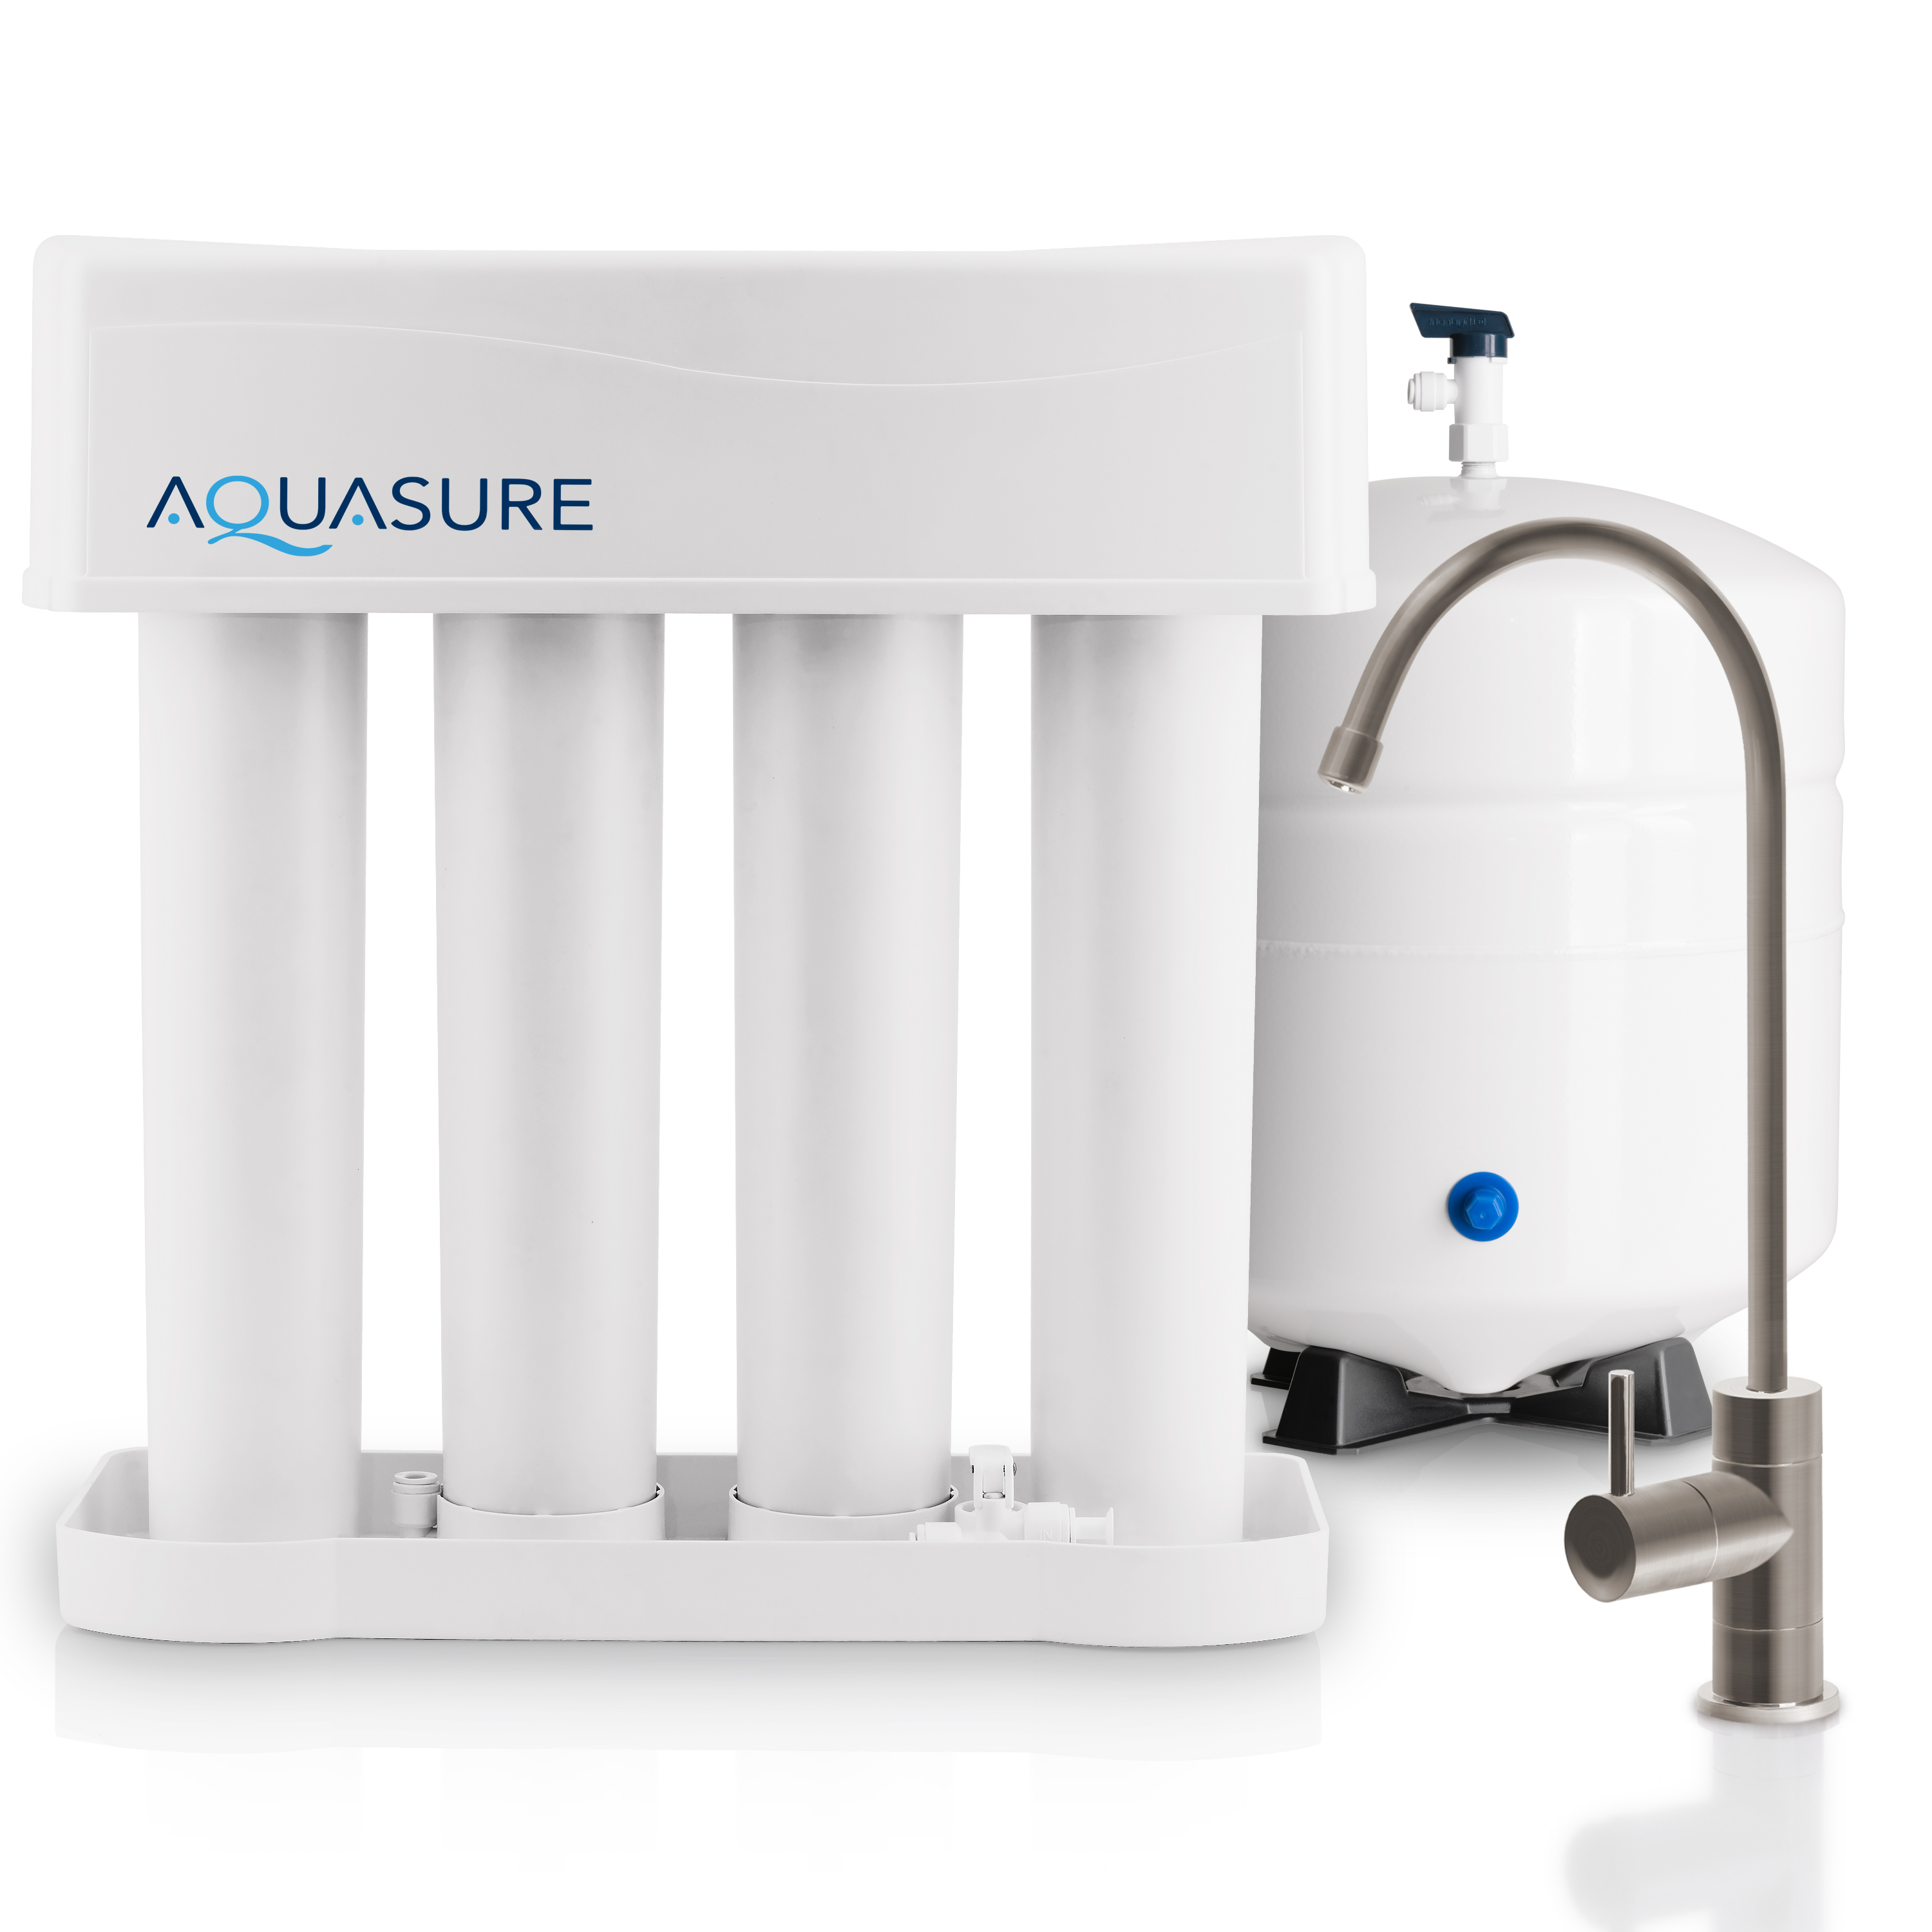 Aquasure Premier Advanced Reverse Osmosis Drinking Water Filtration System w/ Quick Twist Lock - 75 GPD - Brushed Nickel Faucet